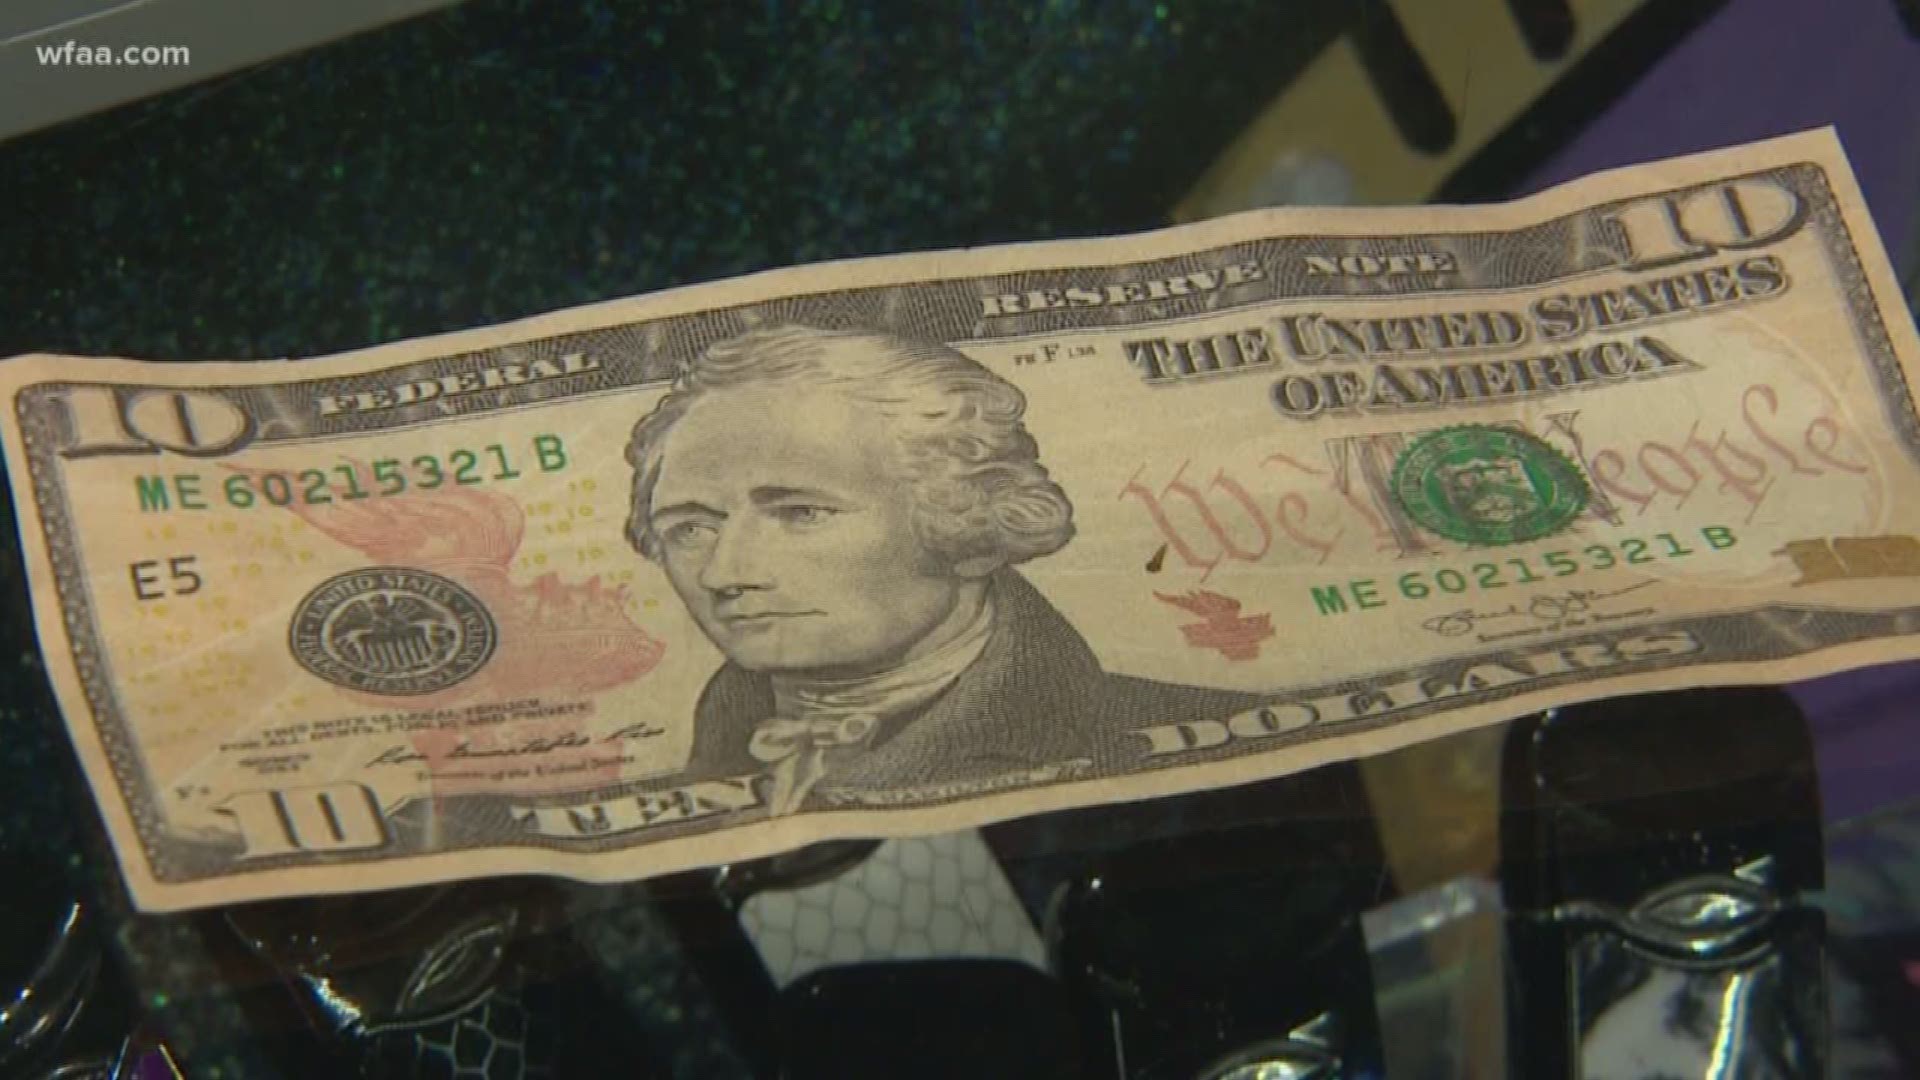 The Community Cancer Association said counterfeit money was used to buy items at its "Helping Hands Social Hour" fundraising event.